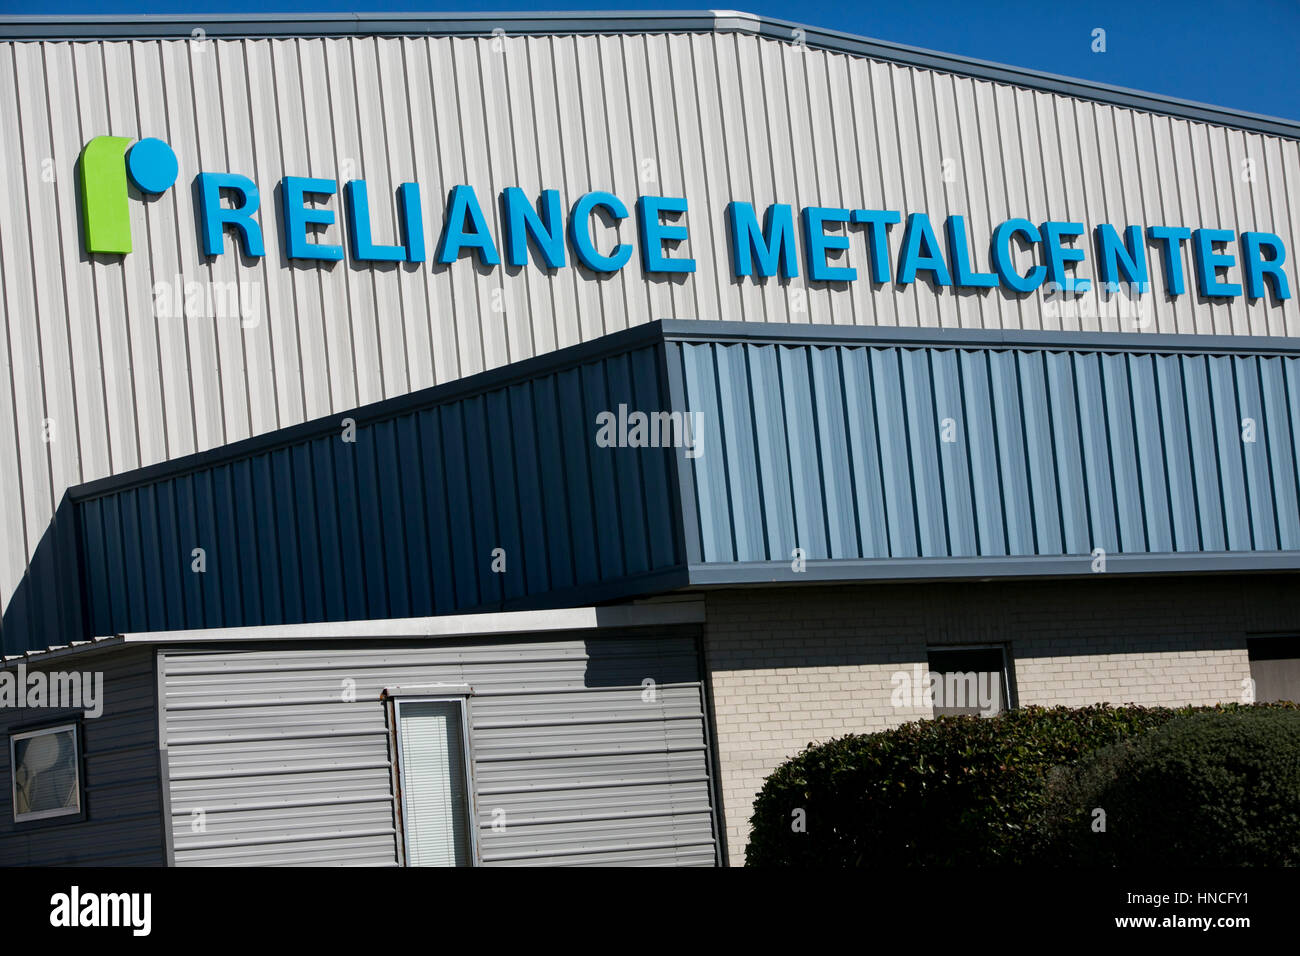 A logo sign outside of a Reliance Metacenter in San Antonio, Texas on January 29, 2017. Stock Photo